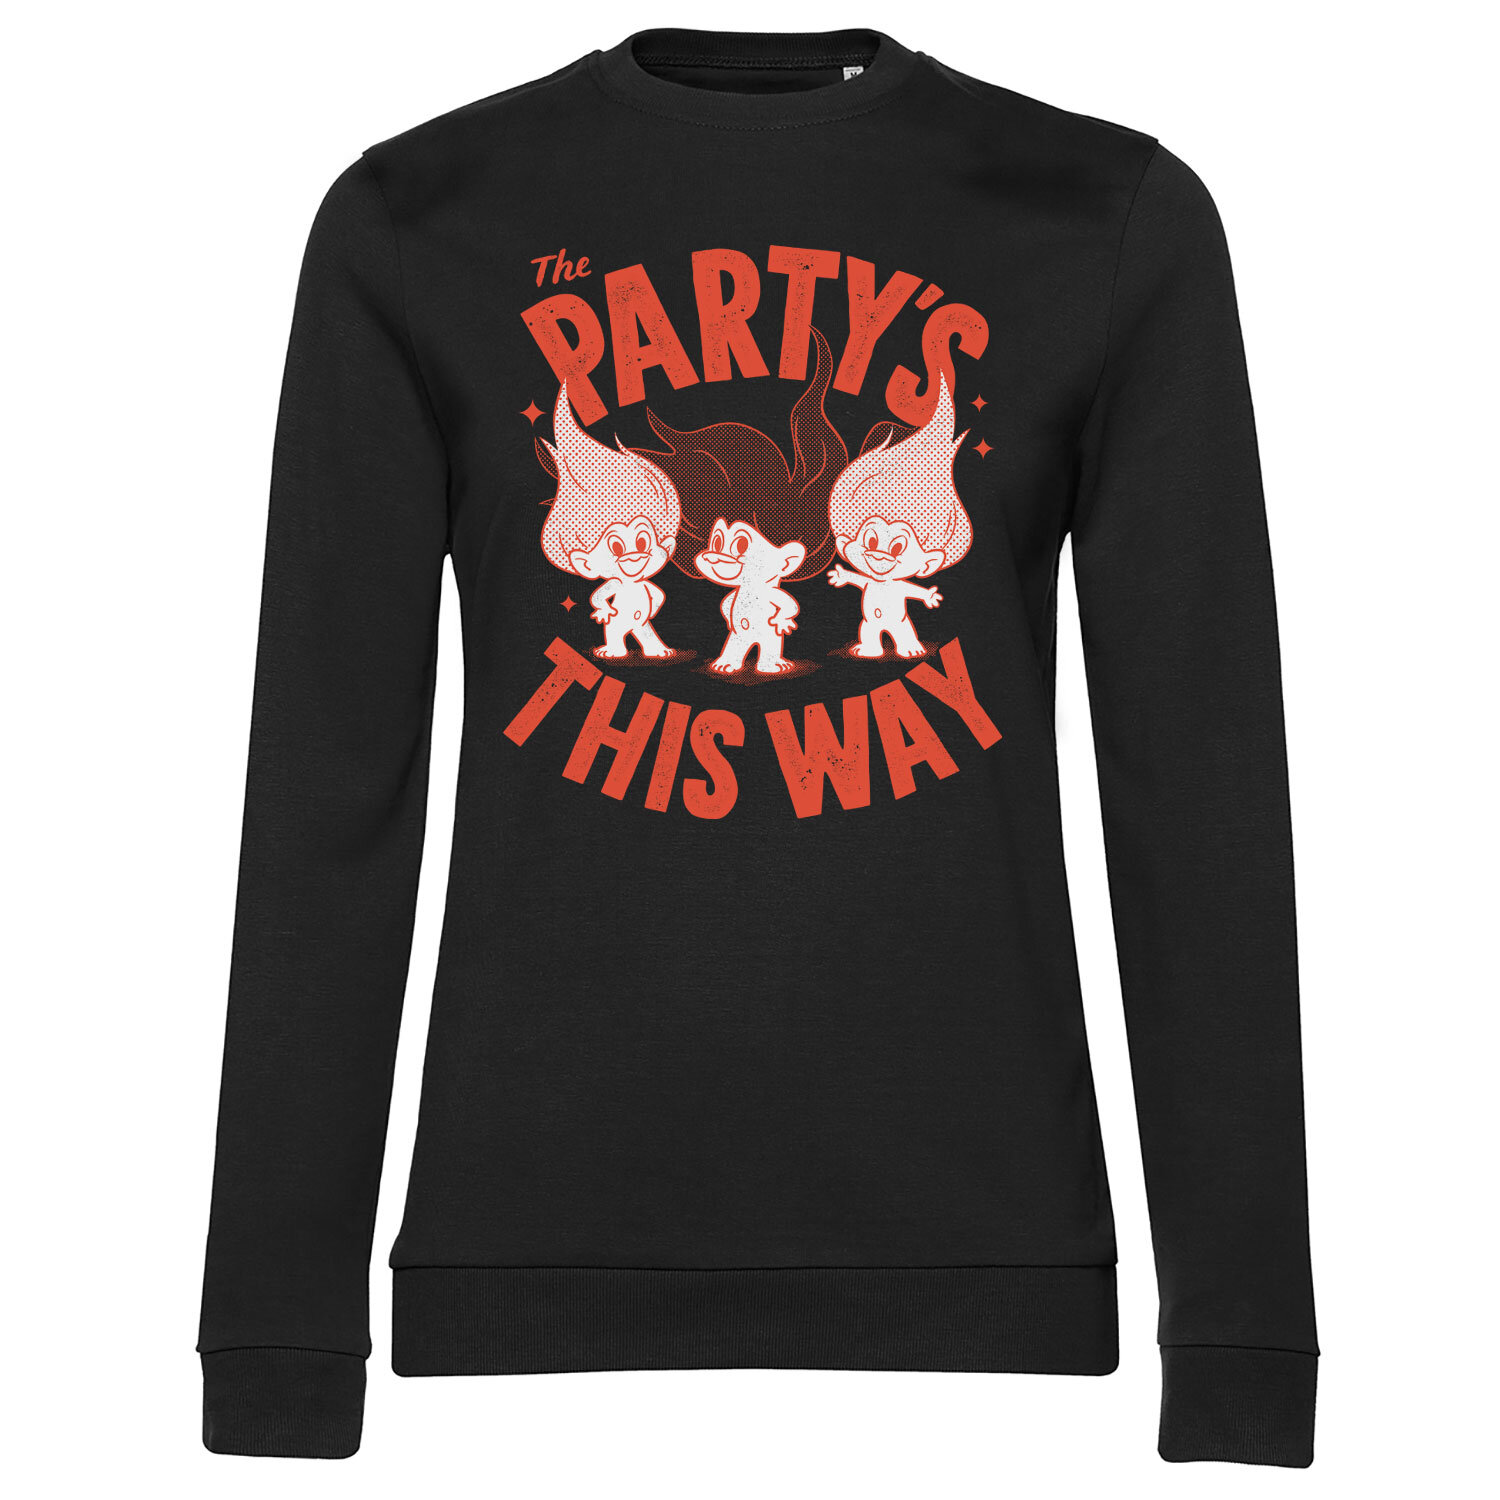 The Party's This Way Girly Sweatshirt